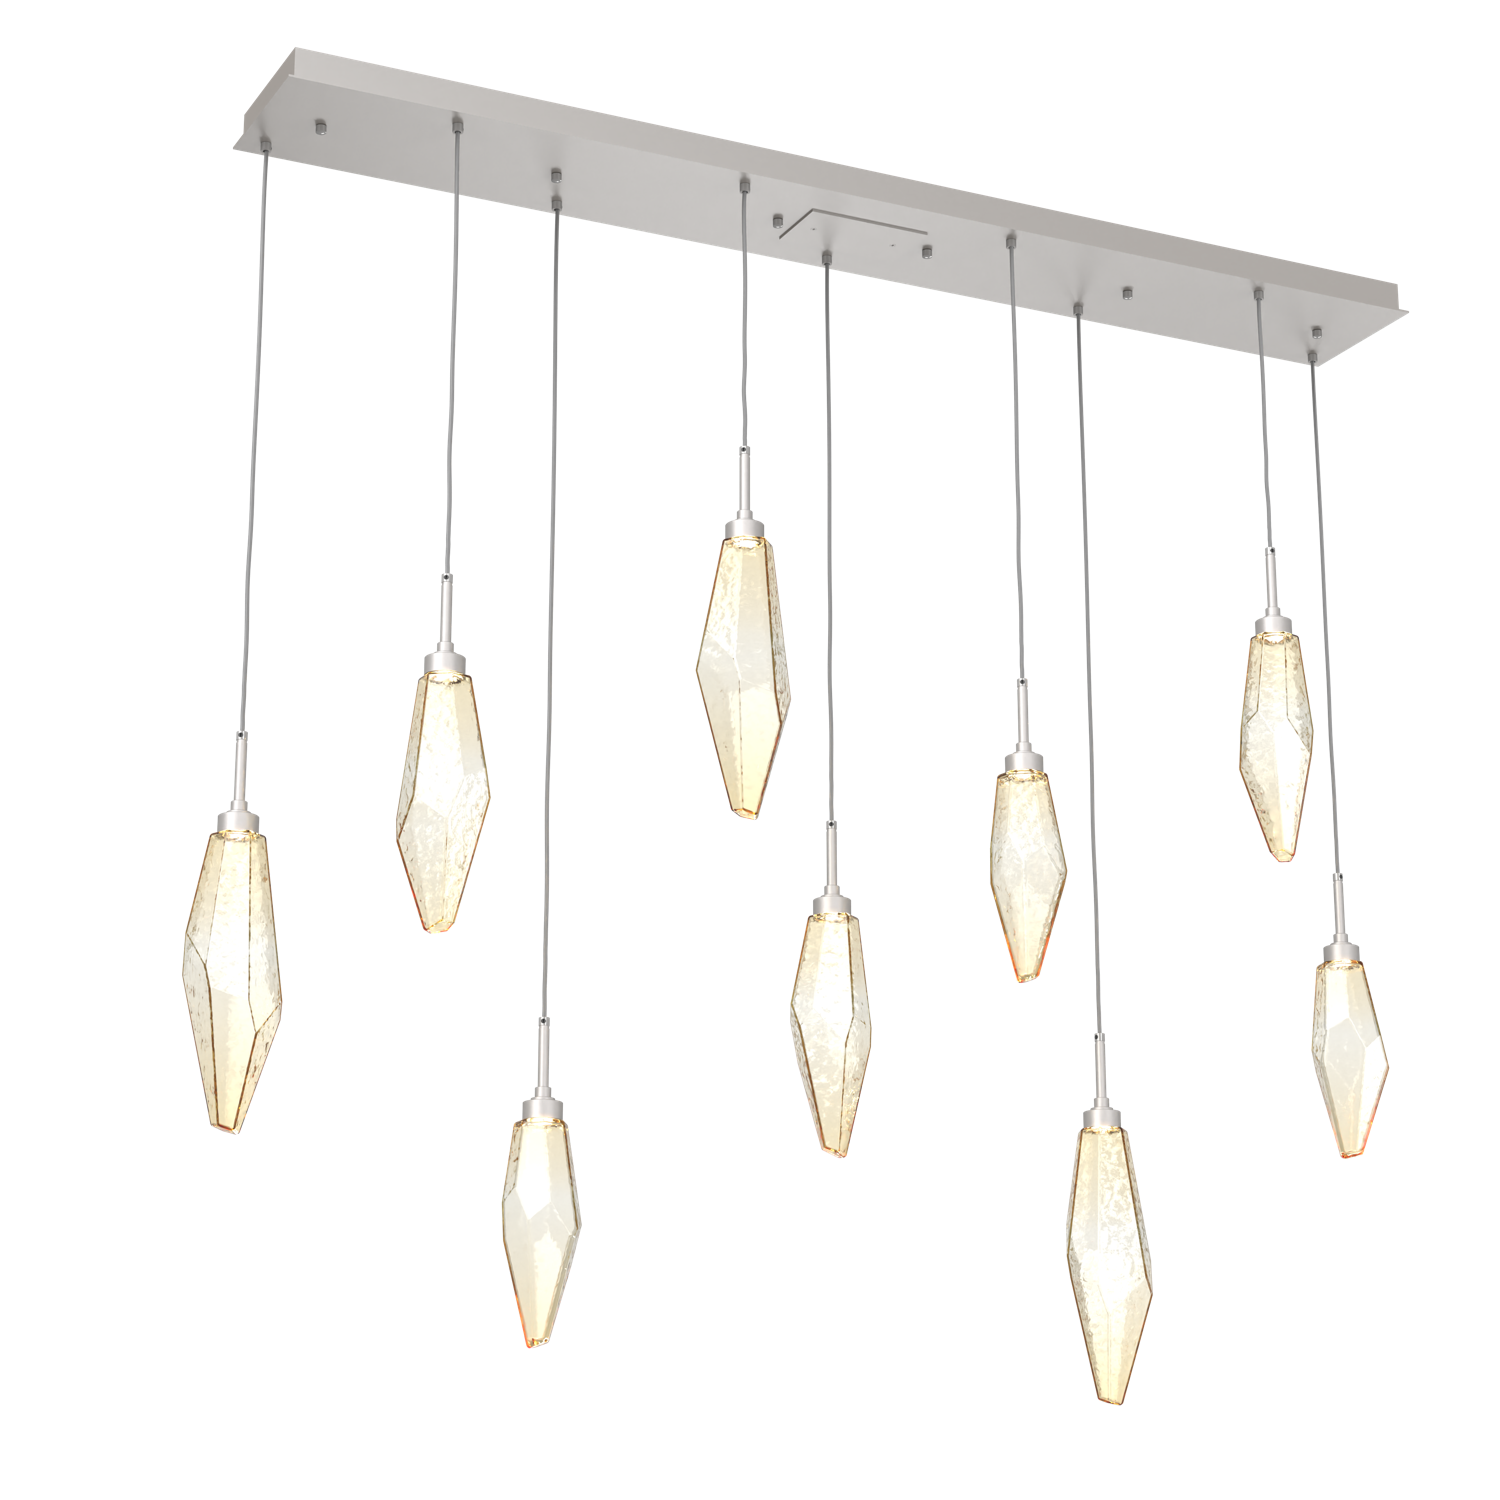 PLB0050-09-BS-CA-Hammerton-Studio-Rock-Crystal-9-light-linear-pendant-chandelier-with-beige-silver-finish-and-chilled-amber-blown-glass-shades-and-LED-lamping